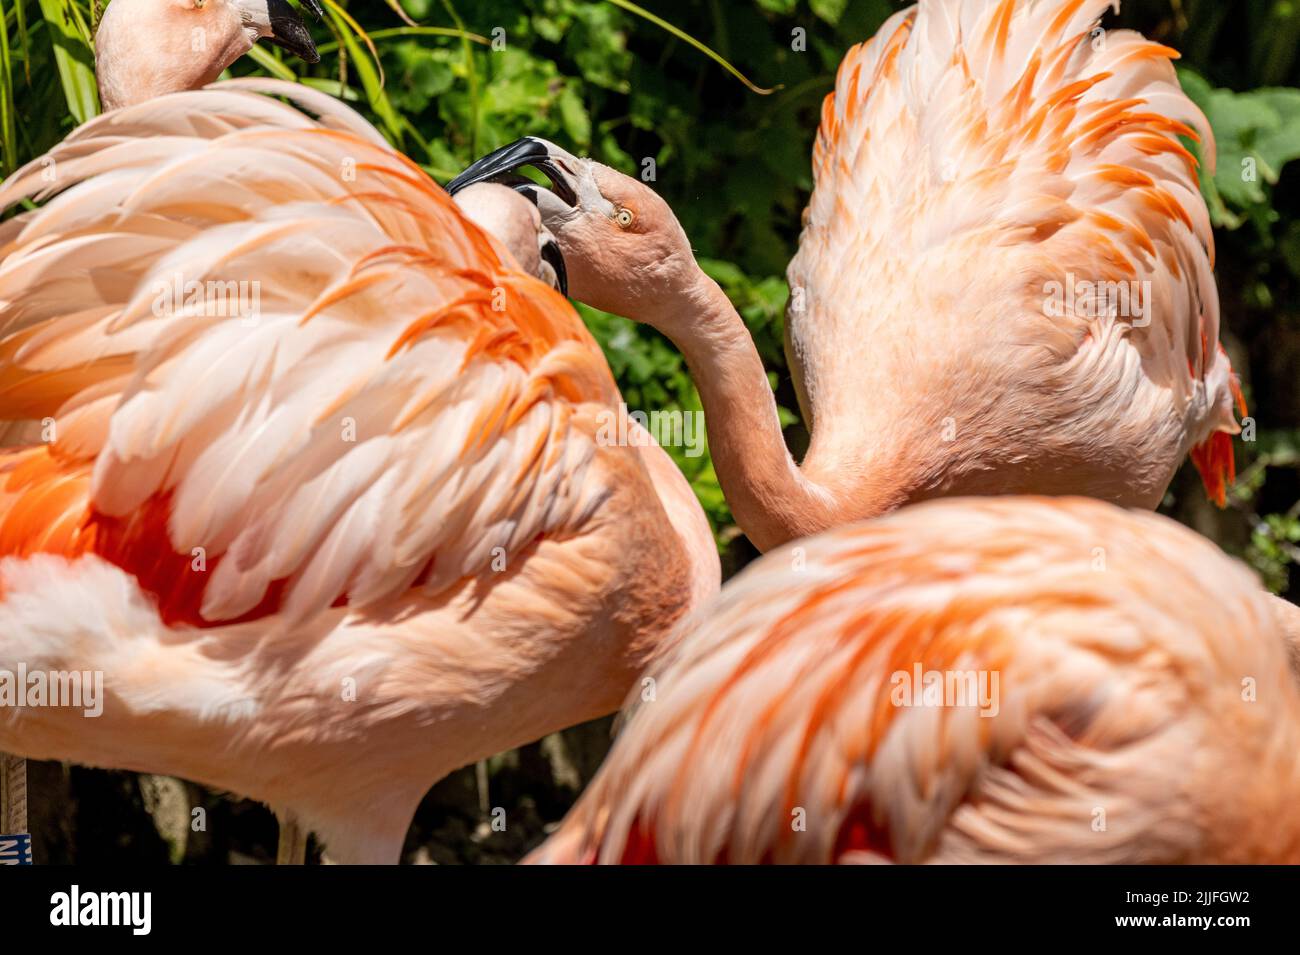 A captive Chilean flamingo, Phoenicopterus chilensis at Jersey zoo. A large flamingo native to South America. Stock Photo